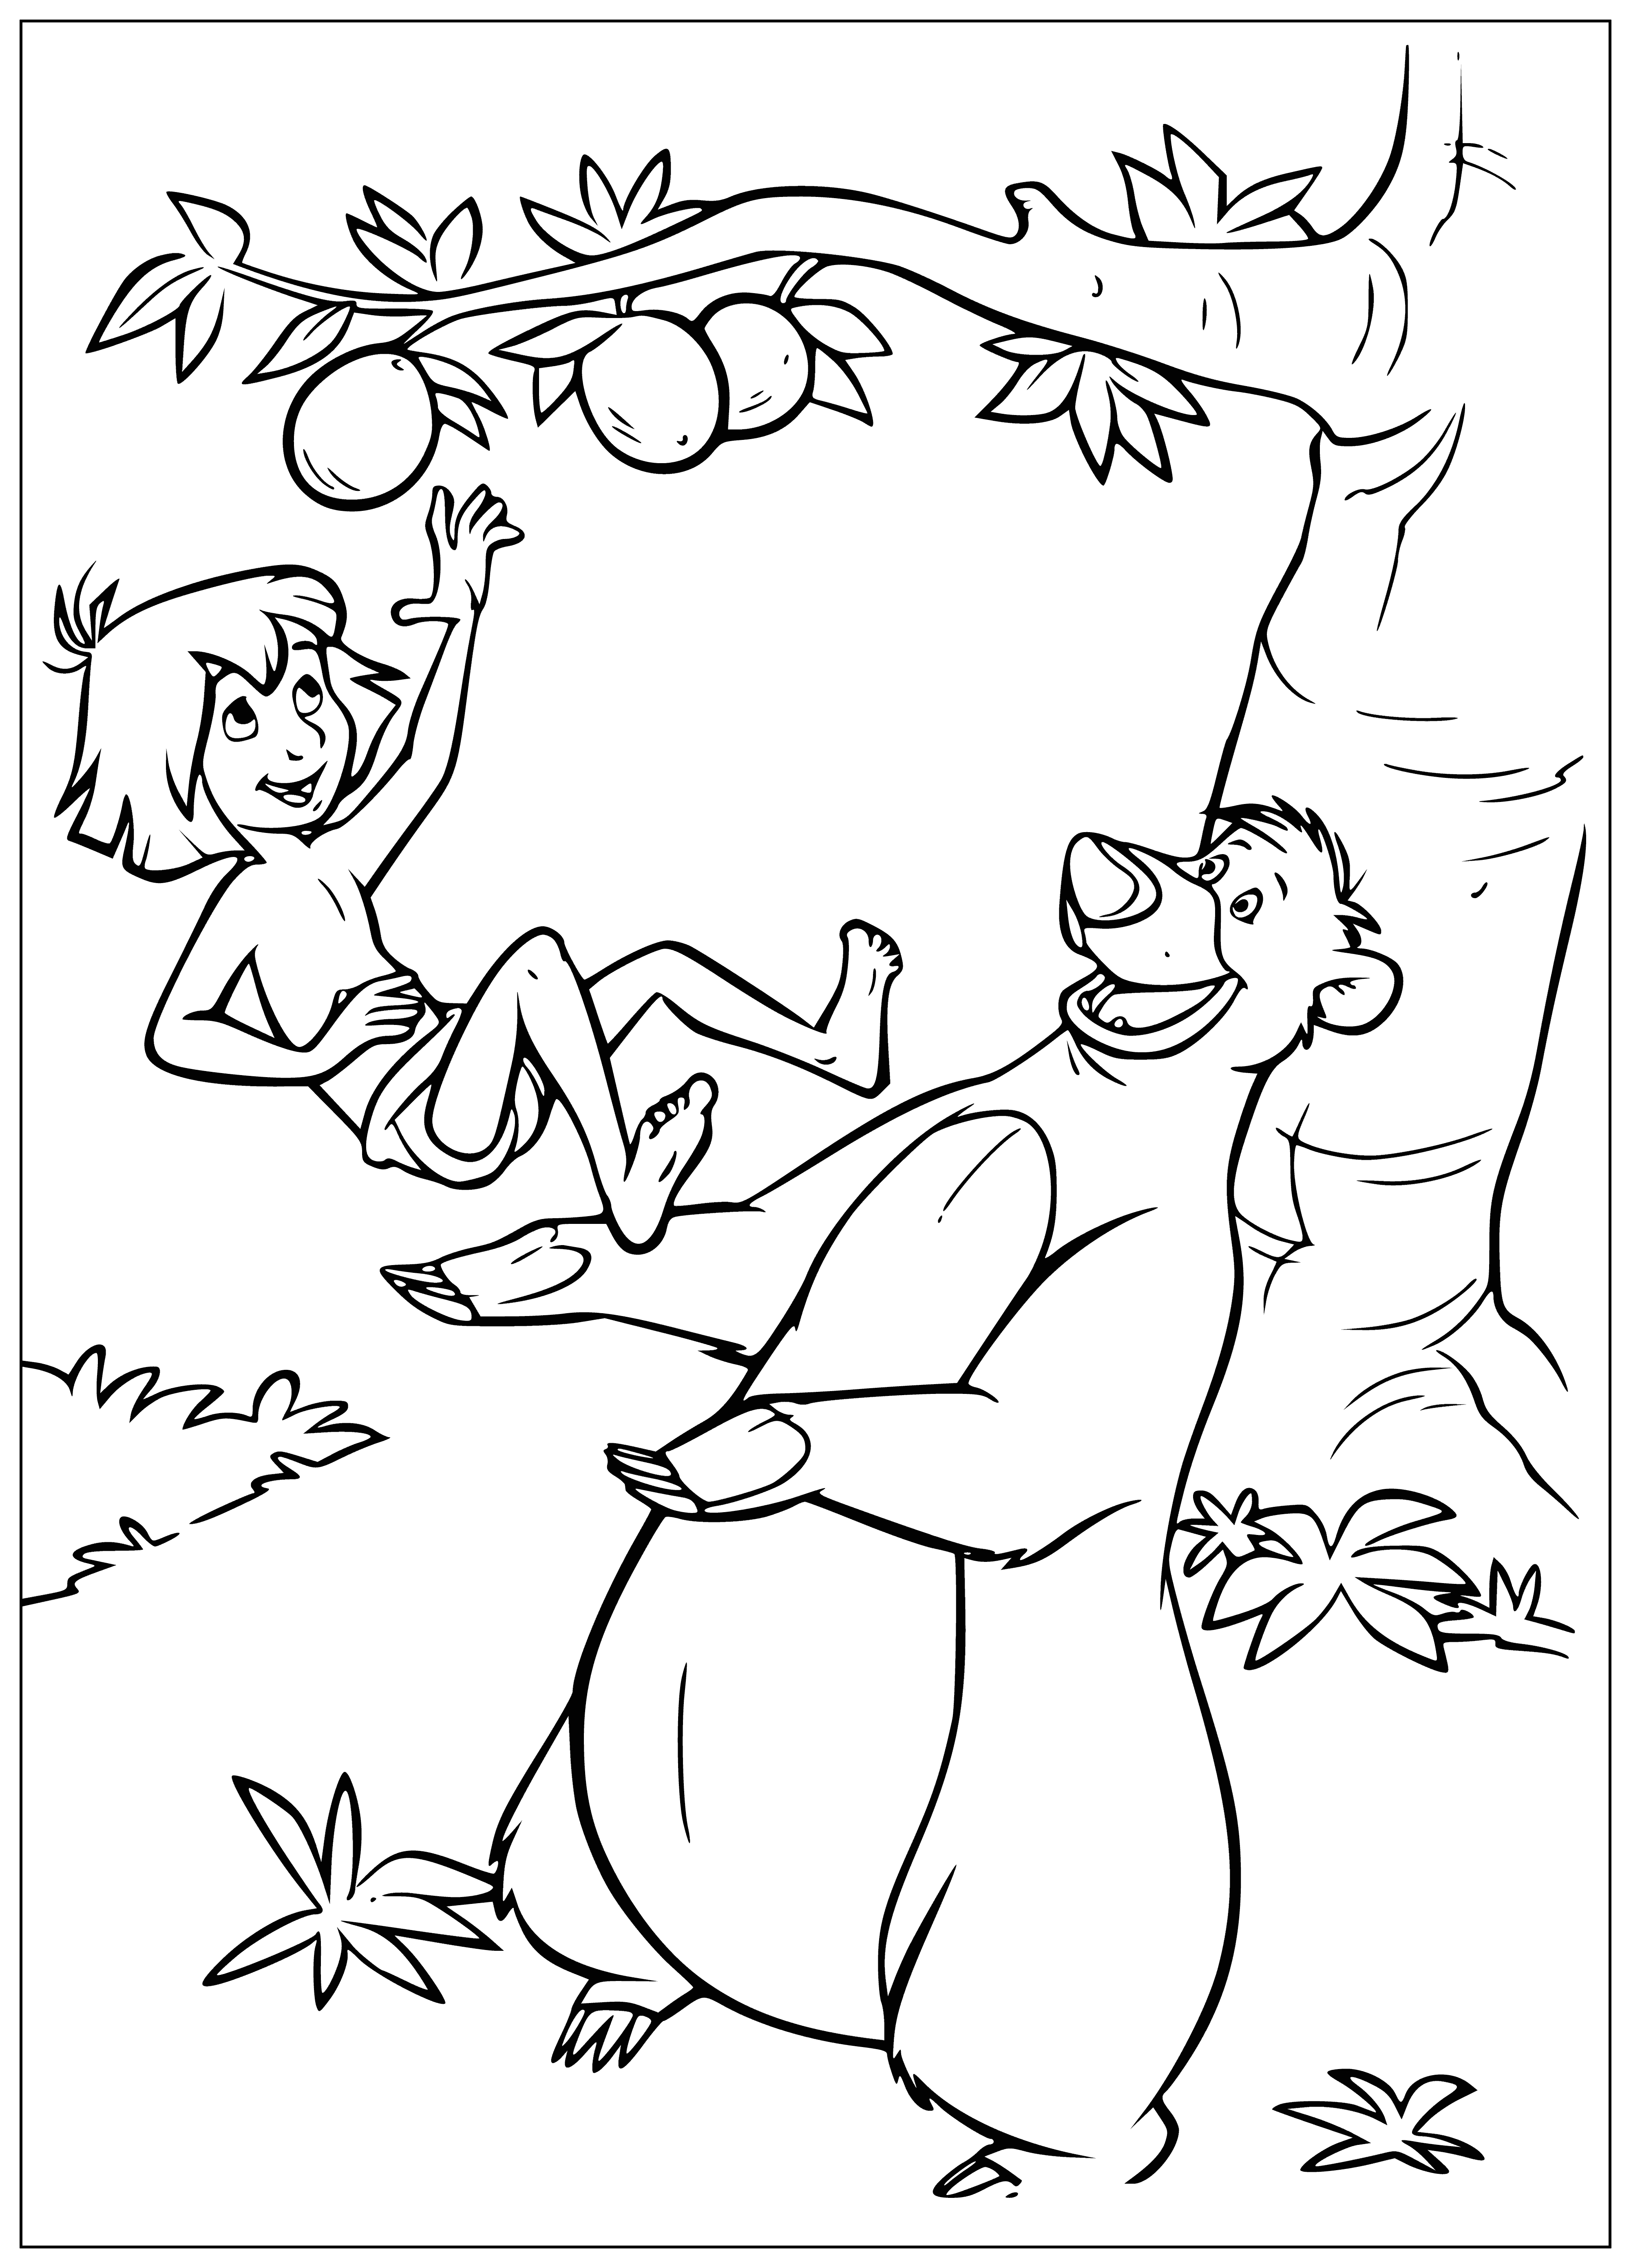 coloring page: Brown bear with long nose walks in jungle, looking for something. #junglelife